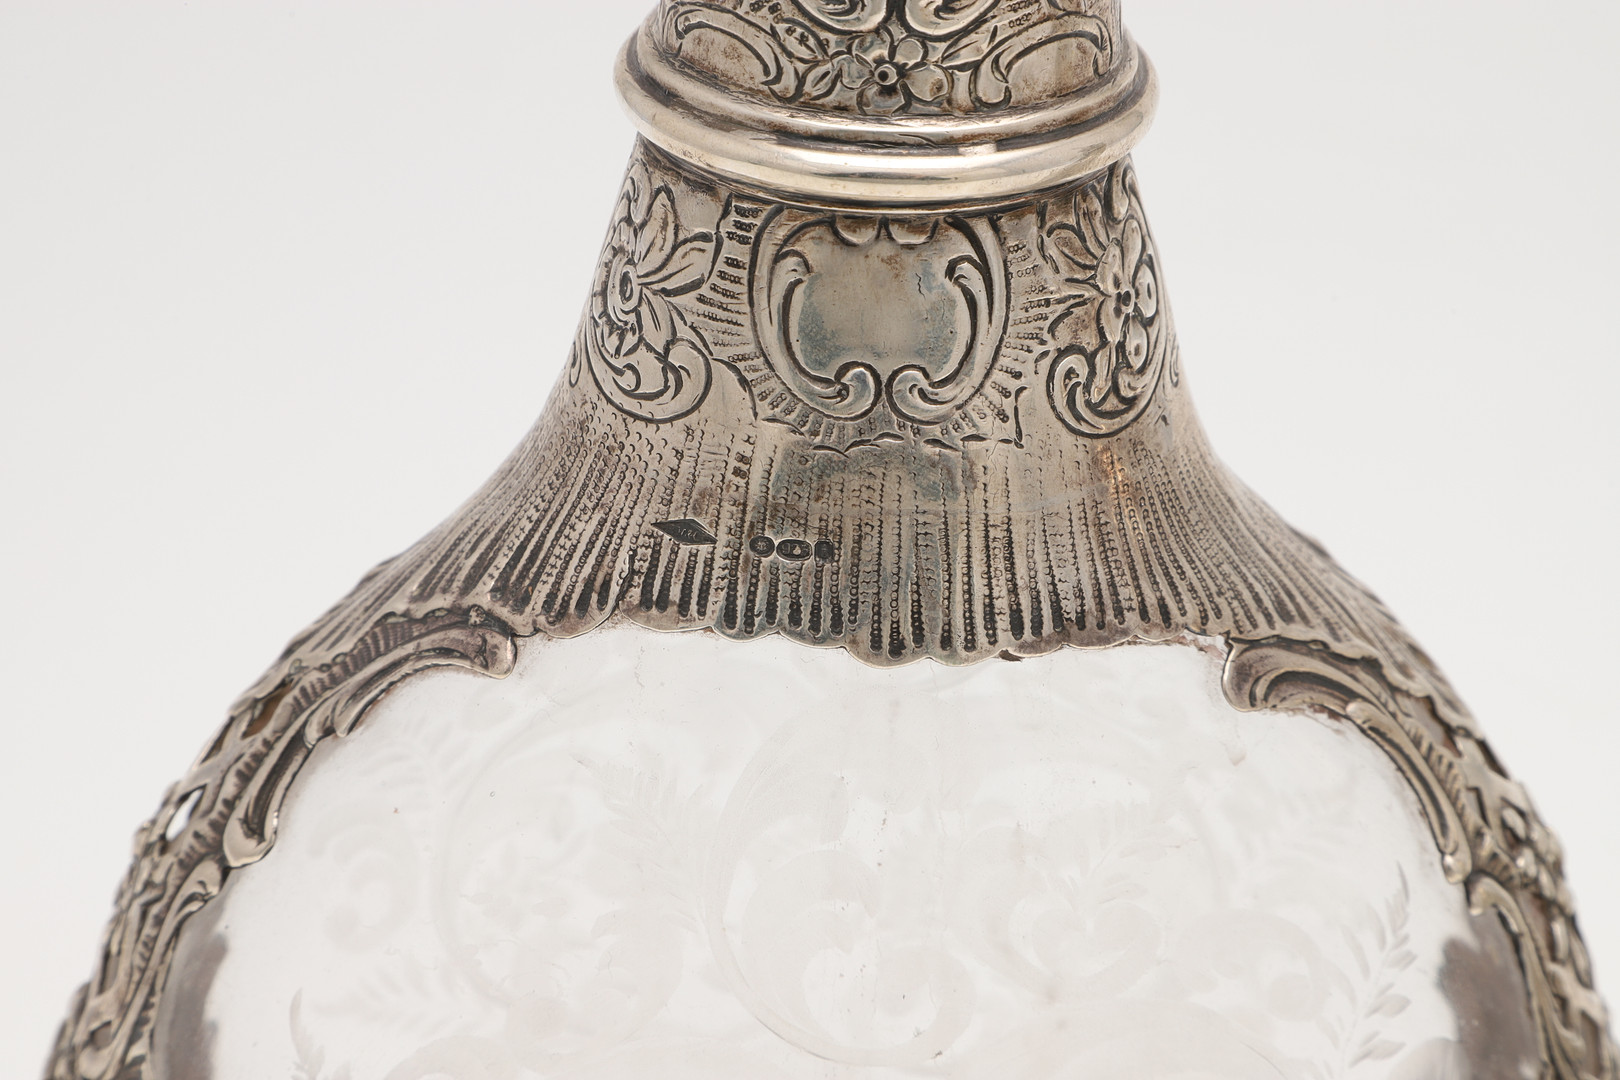 A PAIR OF LATE 19TH/ EARLY 20TH CENTURY GERMAN SILVER MOUNTED DECANTERS. - Image 10 of 13